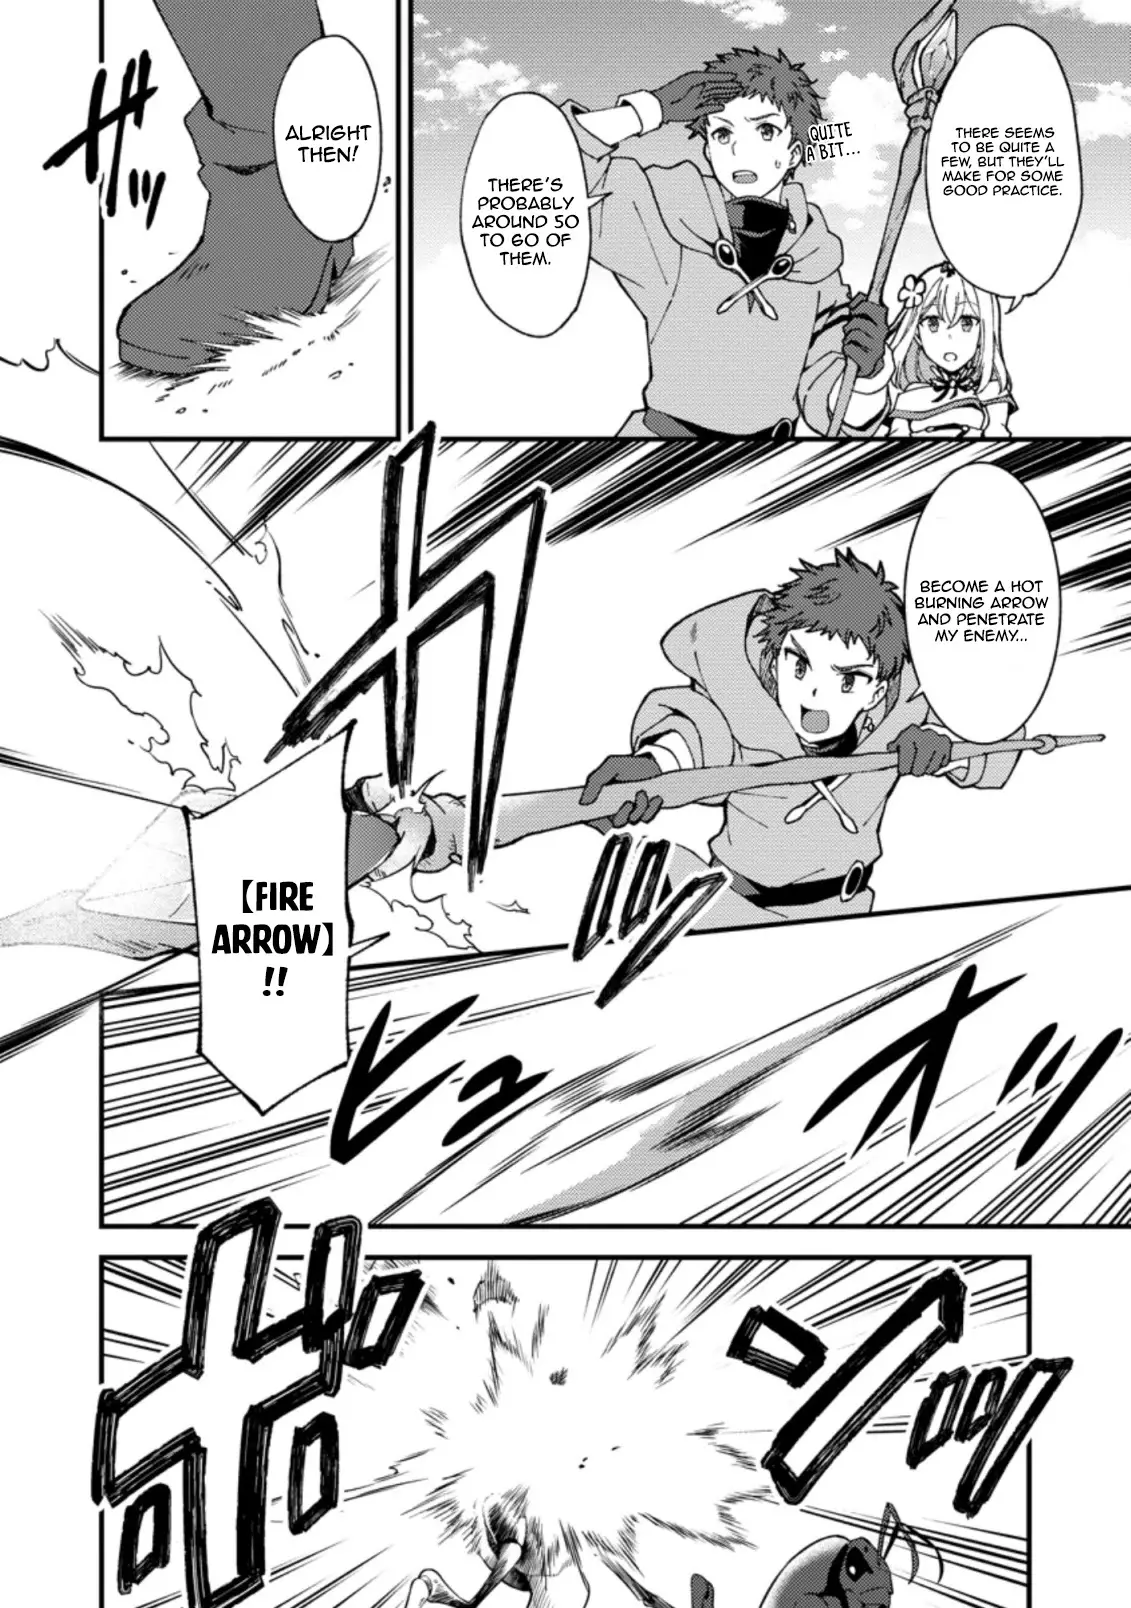 A Sword Master Childhood Friend Power Harassed Me Harshly, So I Broke Off Our Relationship And Make A Fresh Start At The Frontier As A Magic Swordsman. - 4 page 23